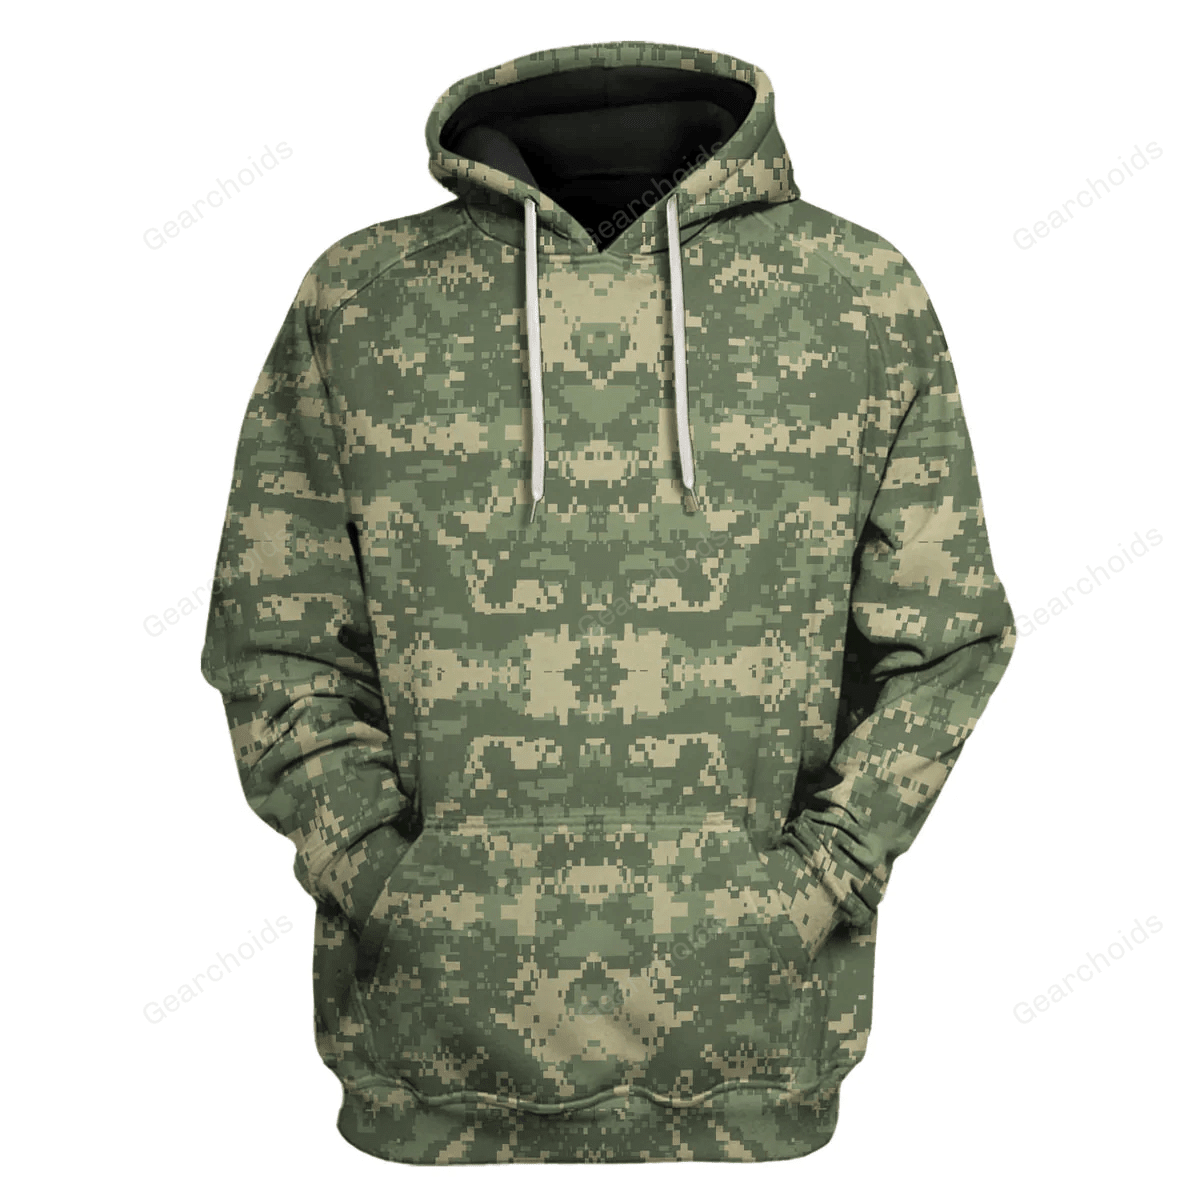 American ACU or Universal Camouflage Pattern (UCP) CAMO